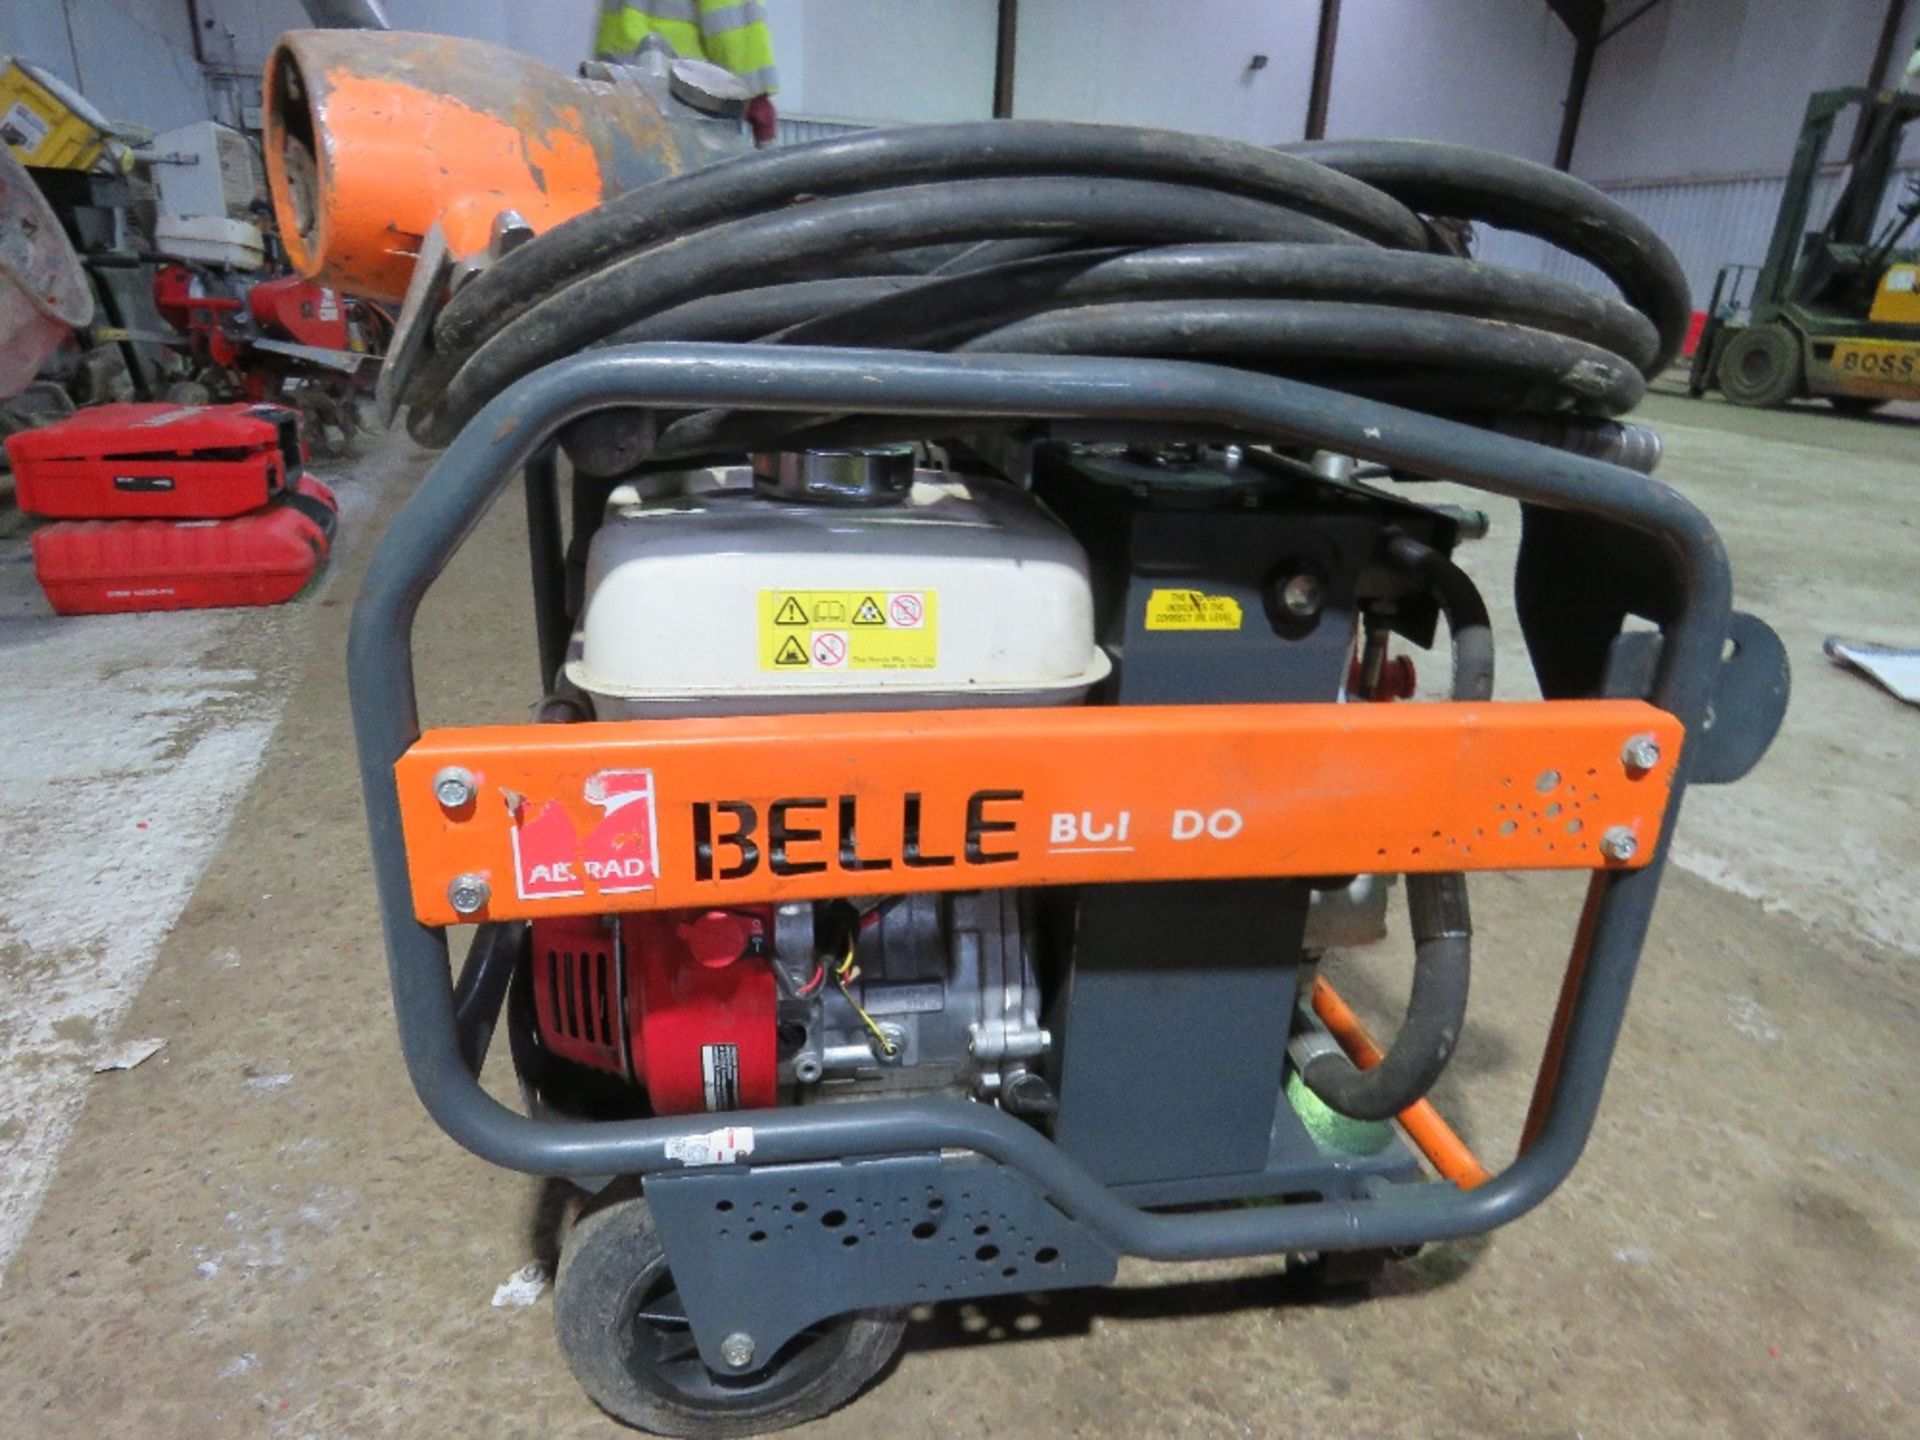 BELLE BULLDOG 20/140 PETROL ENGINED HYDRAULIC BREAKER PACK WITH HOSE AND GUN. - Image 3 of 4